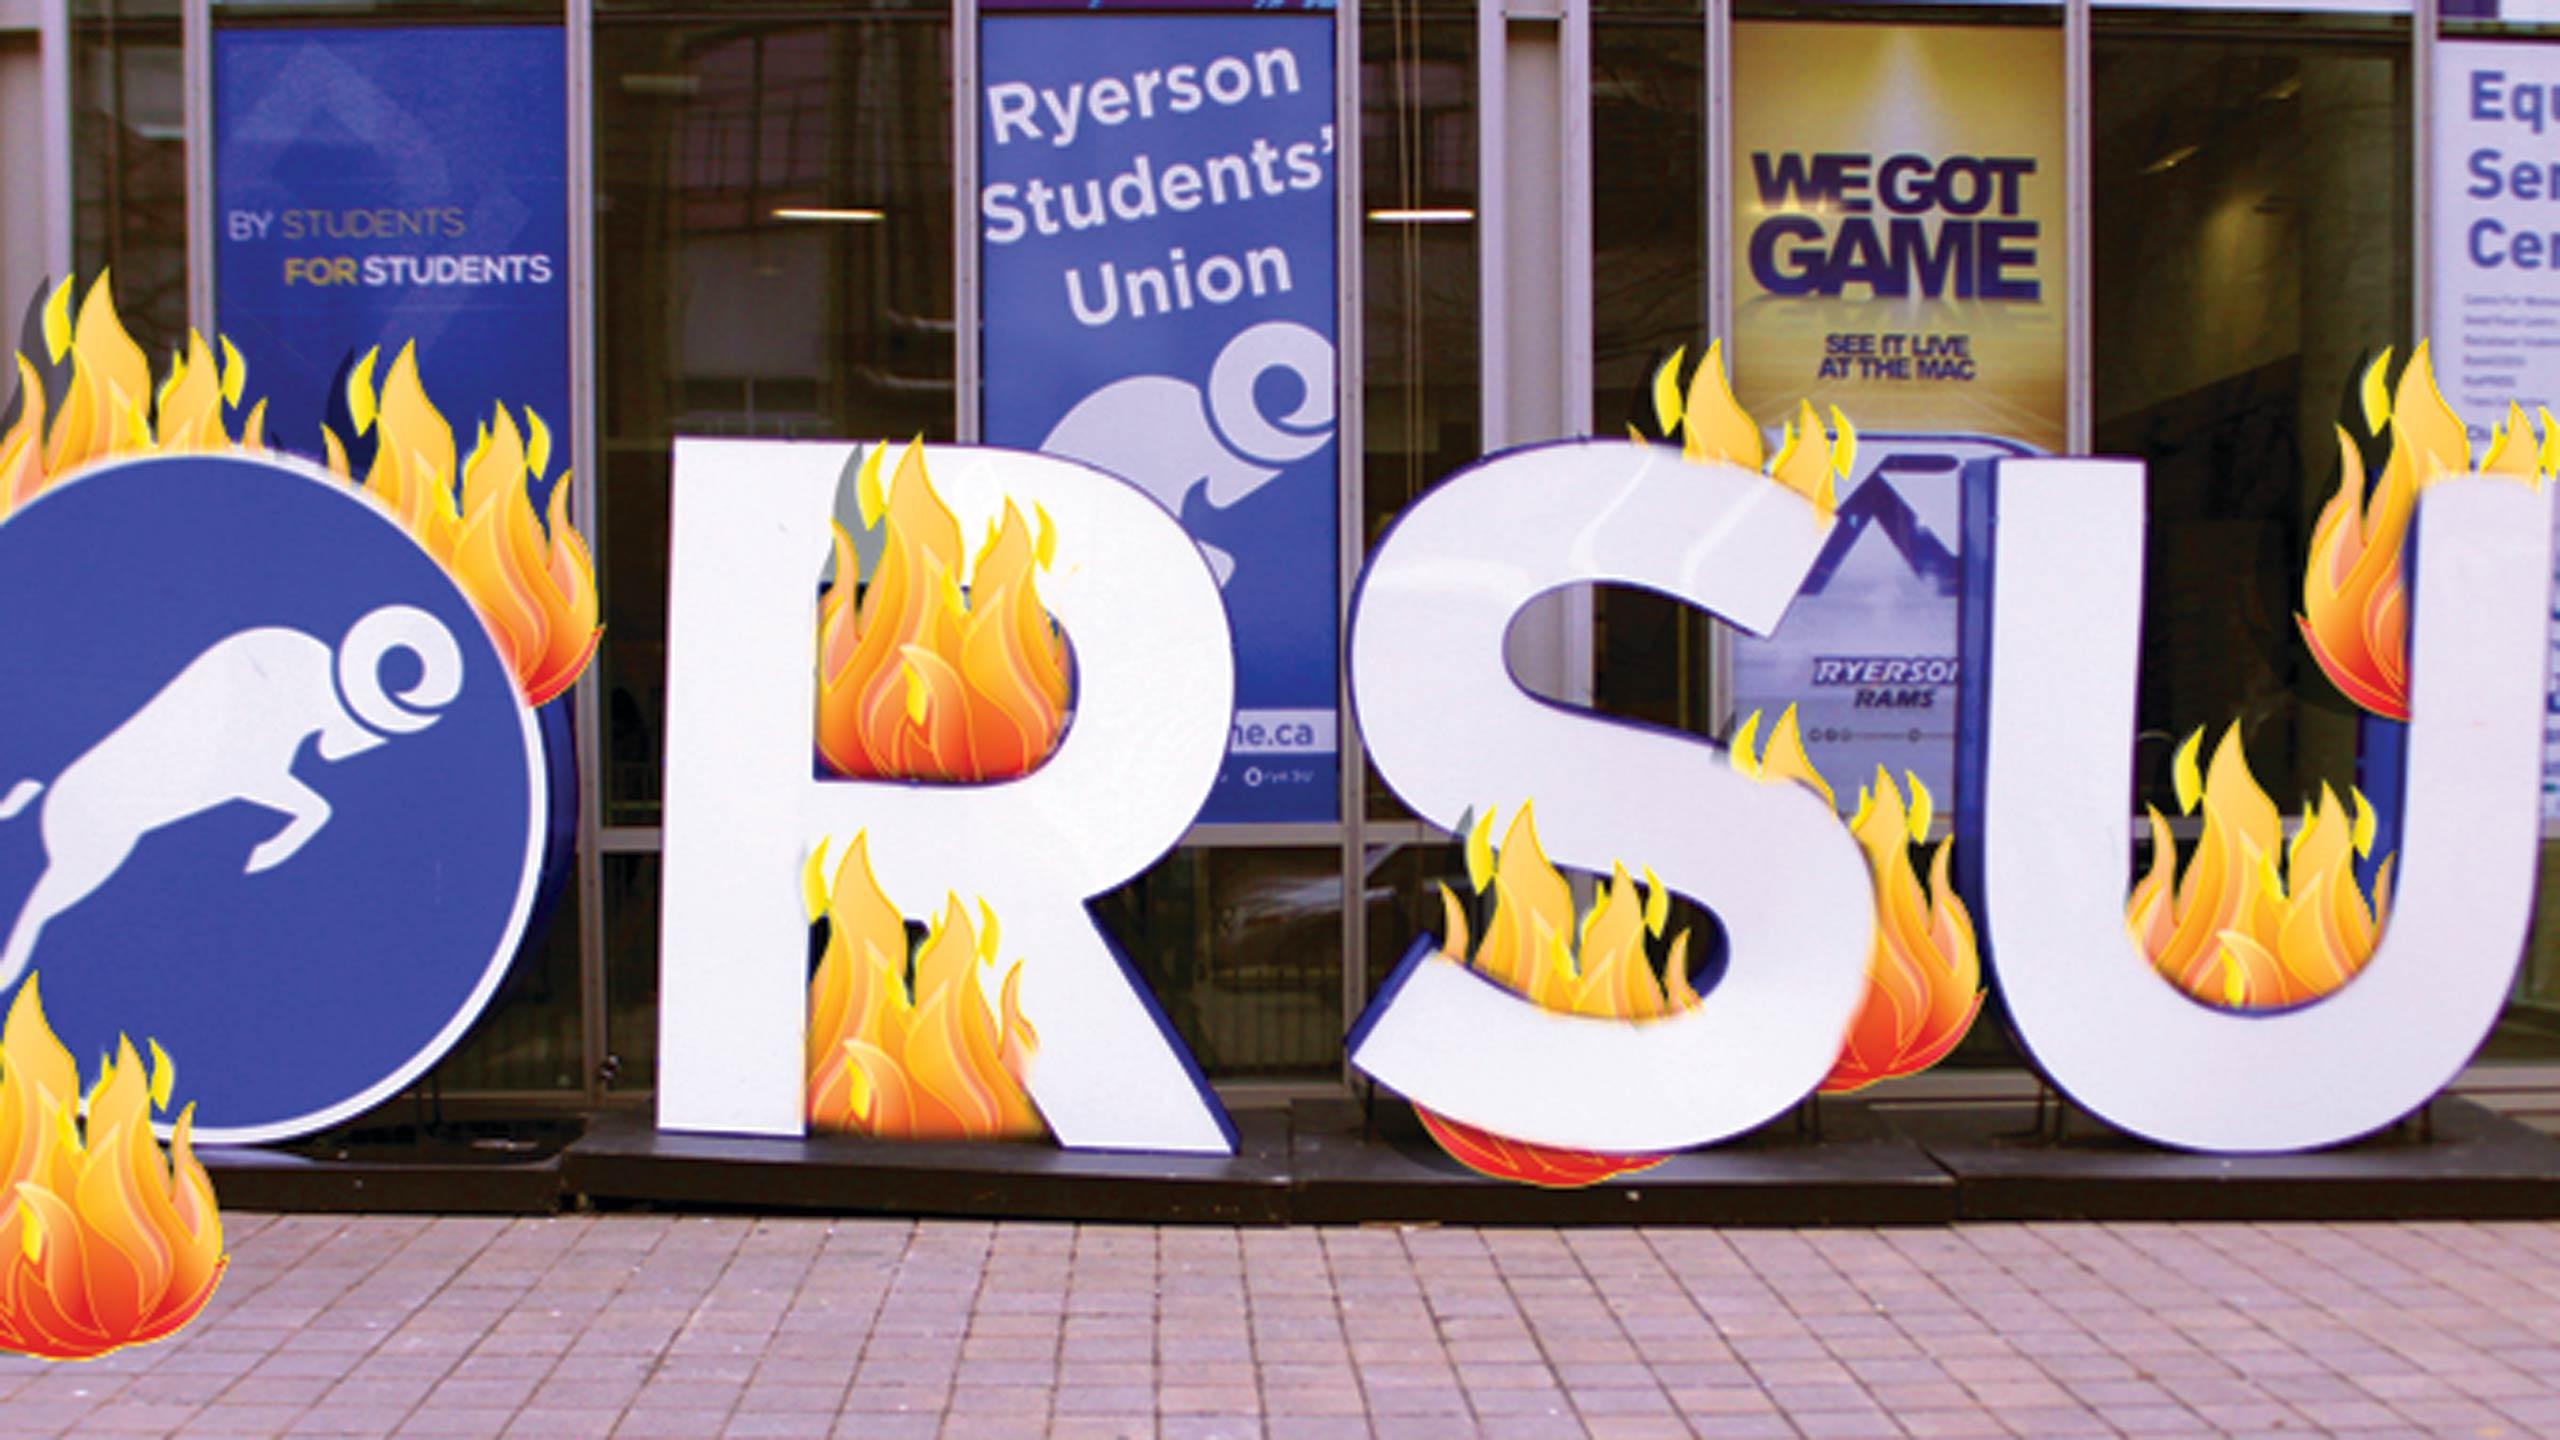 Words spelling out "RSU" with flame around it